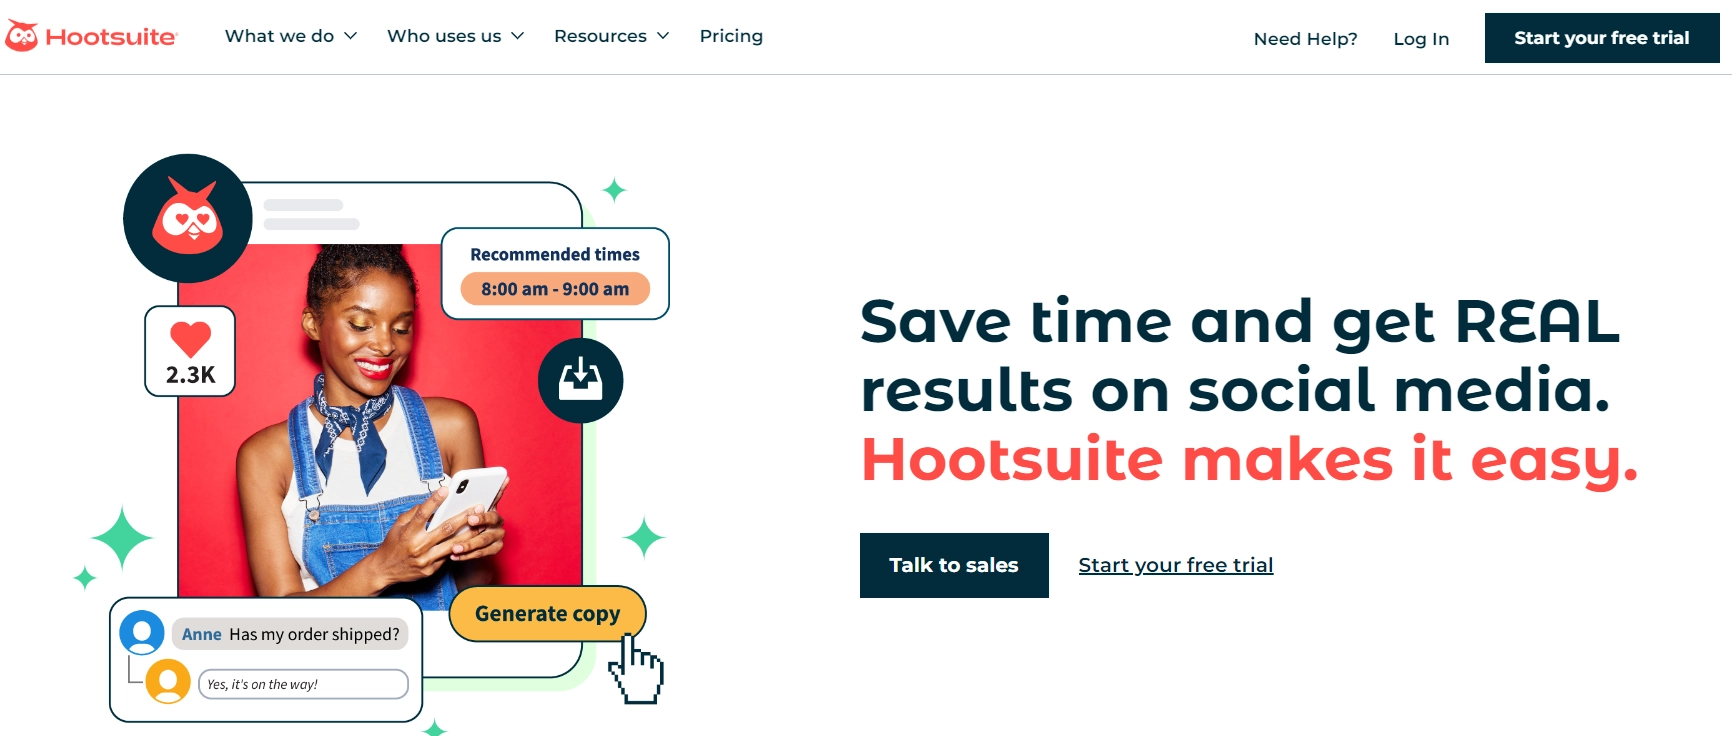 Hootsuite Search Engine Optimization Tools